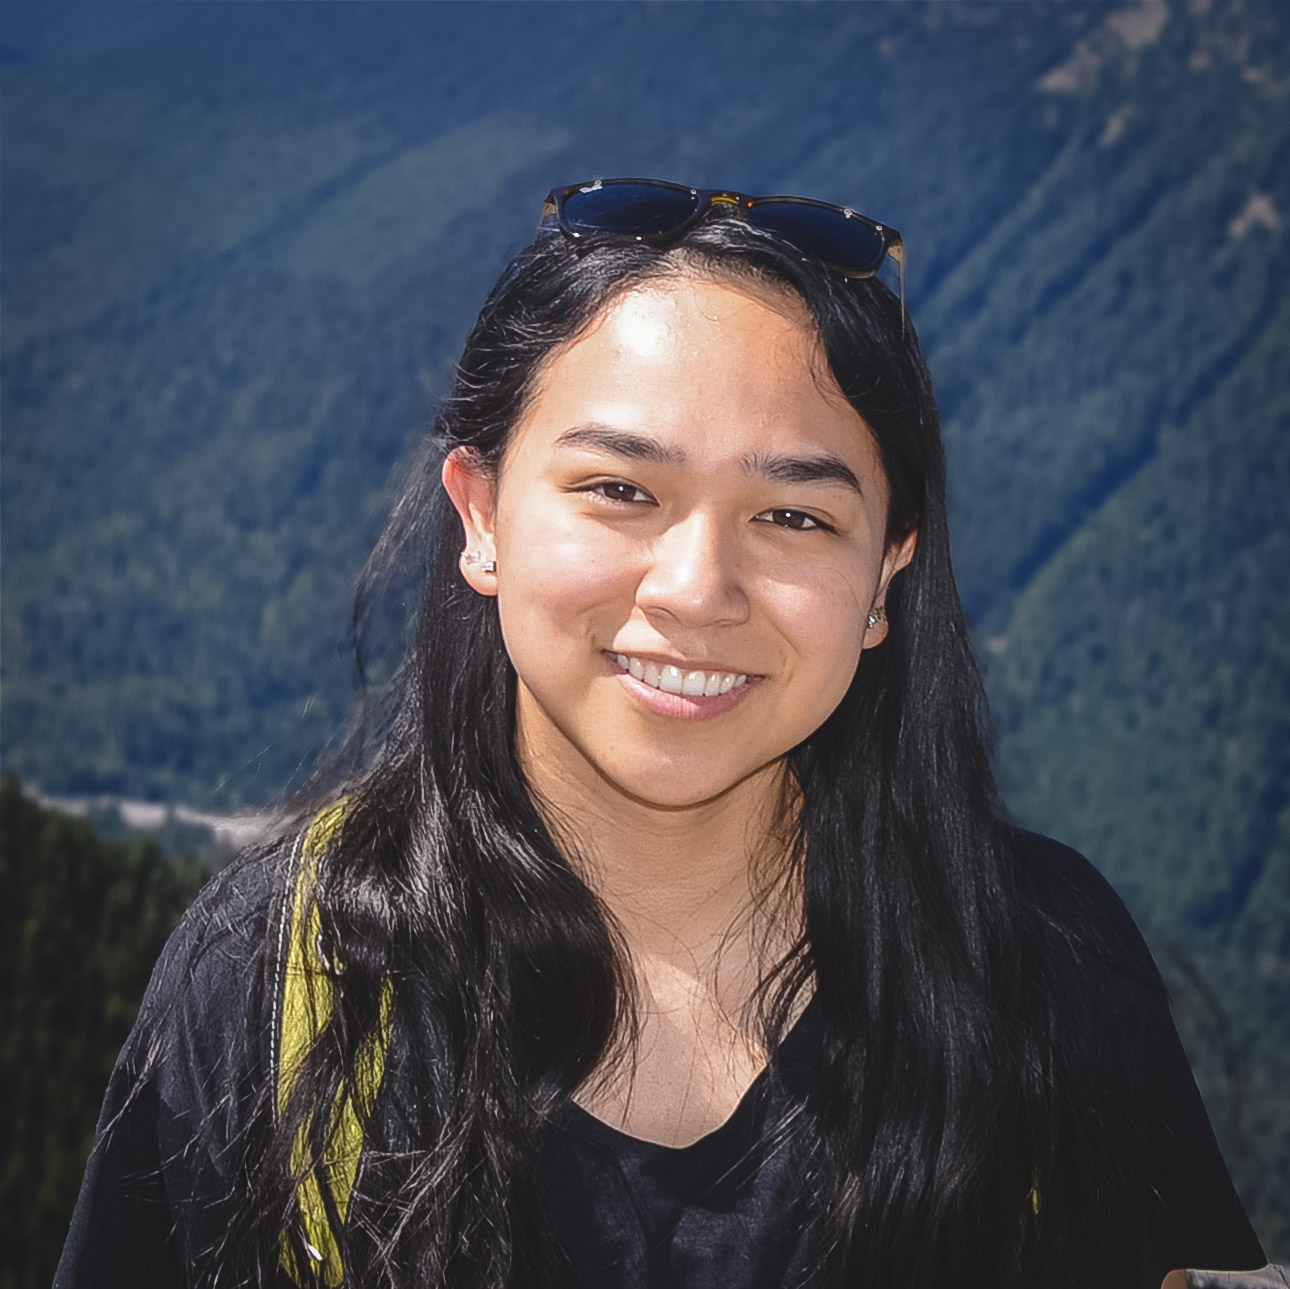 A smiling person with long dark hair posing before a mountain view